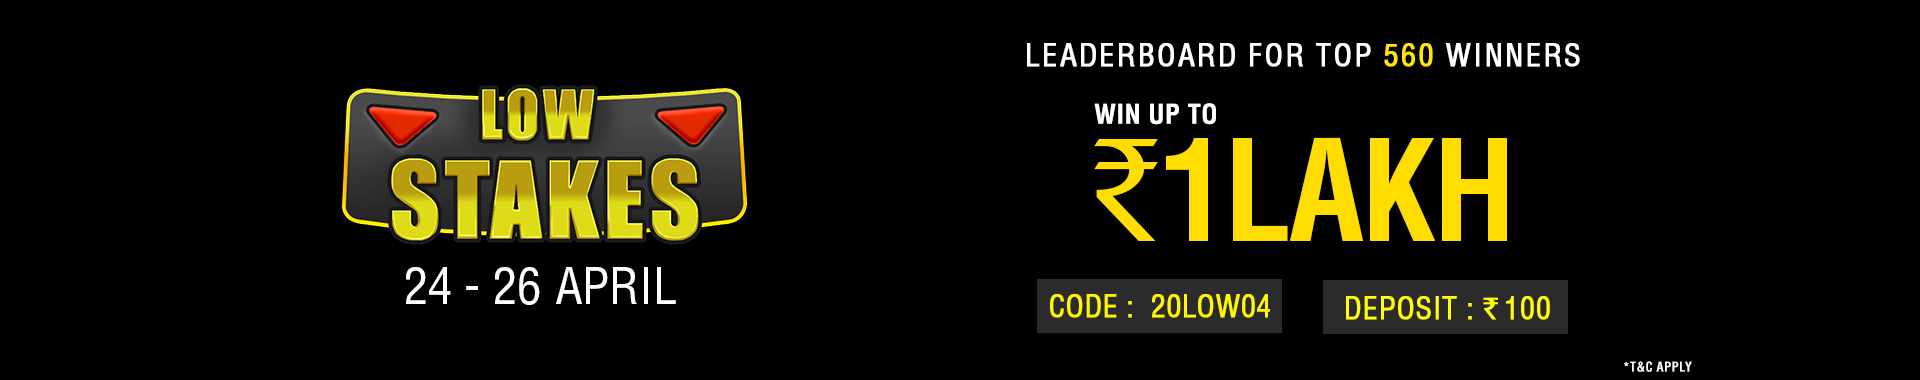 Low Stakes Leaderboard Contest